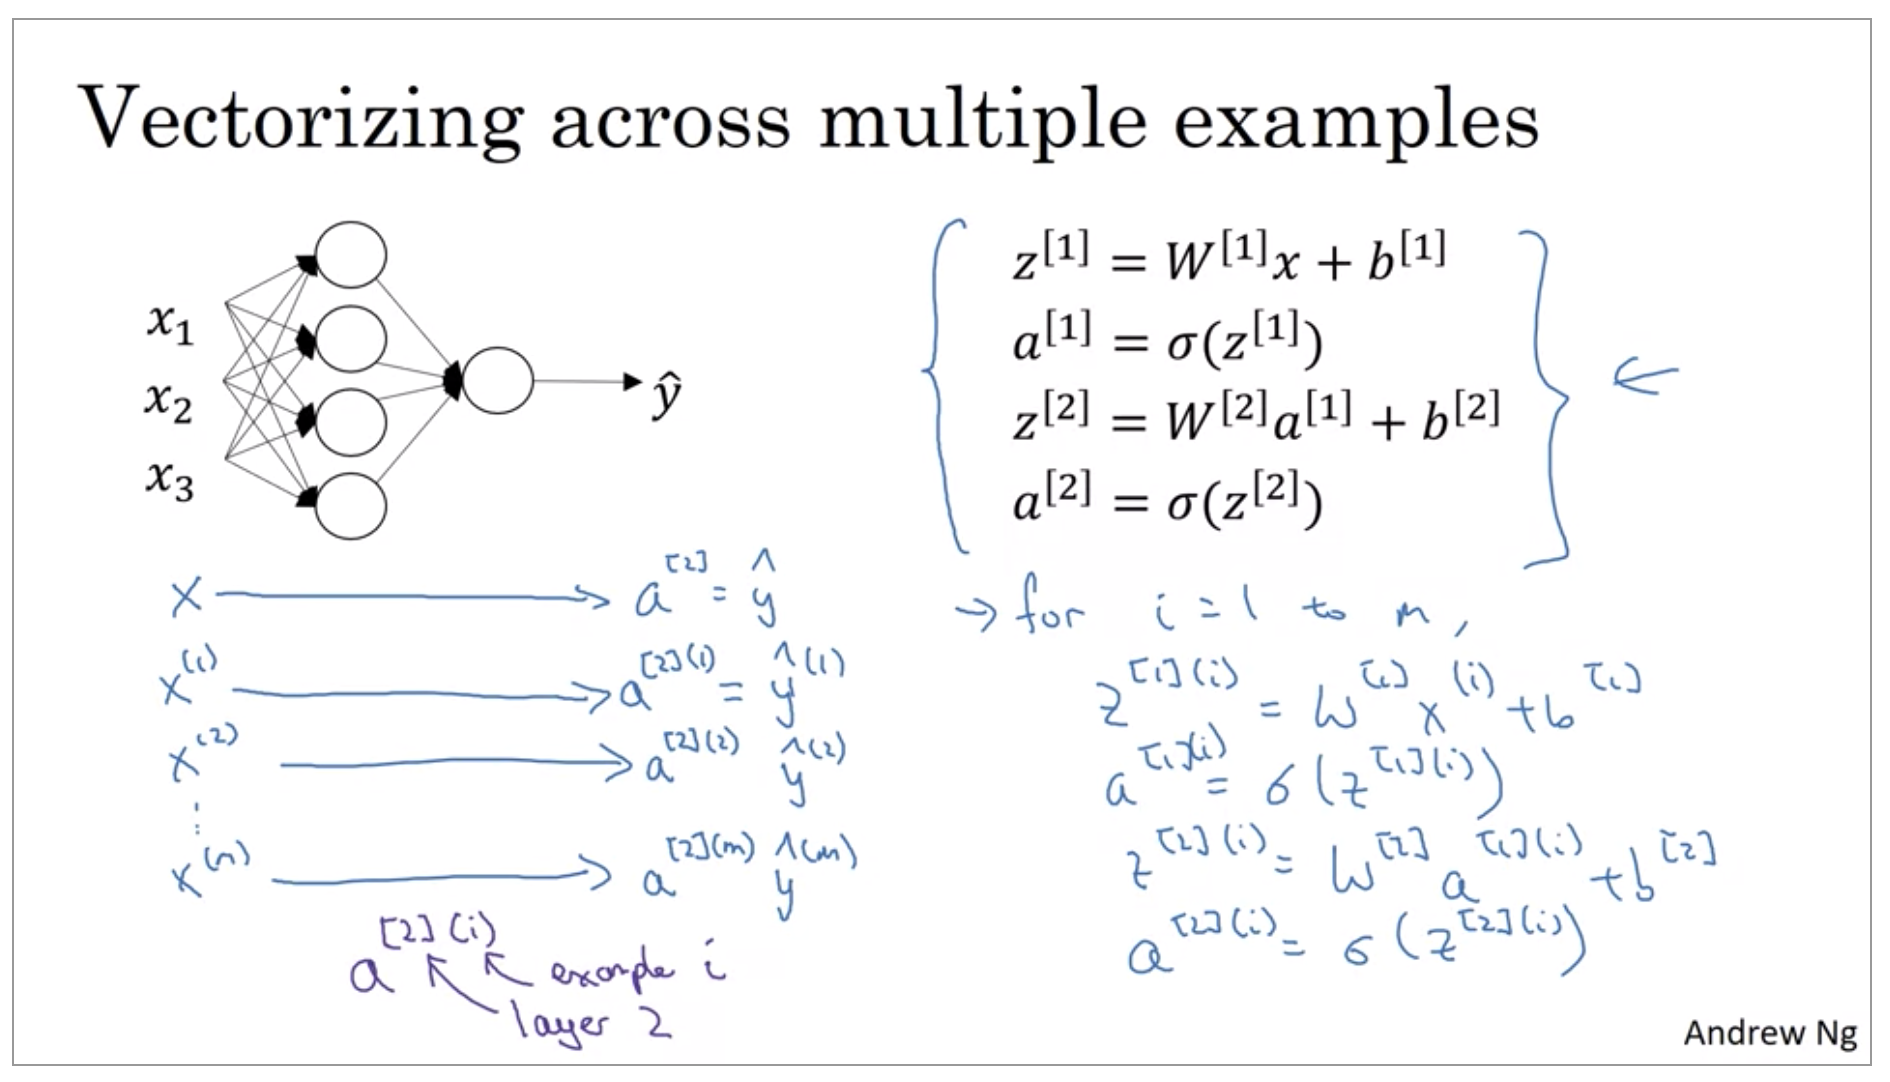 vectorizing-across-multiple-examples.png